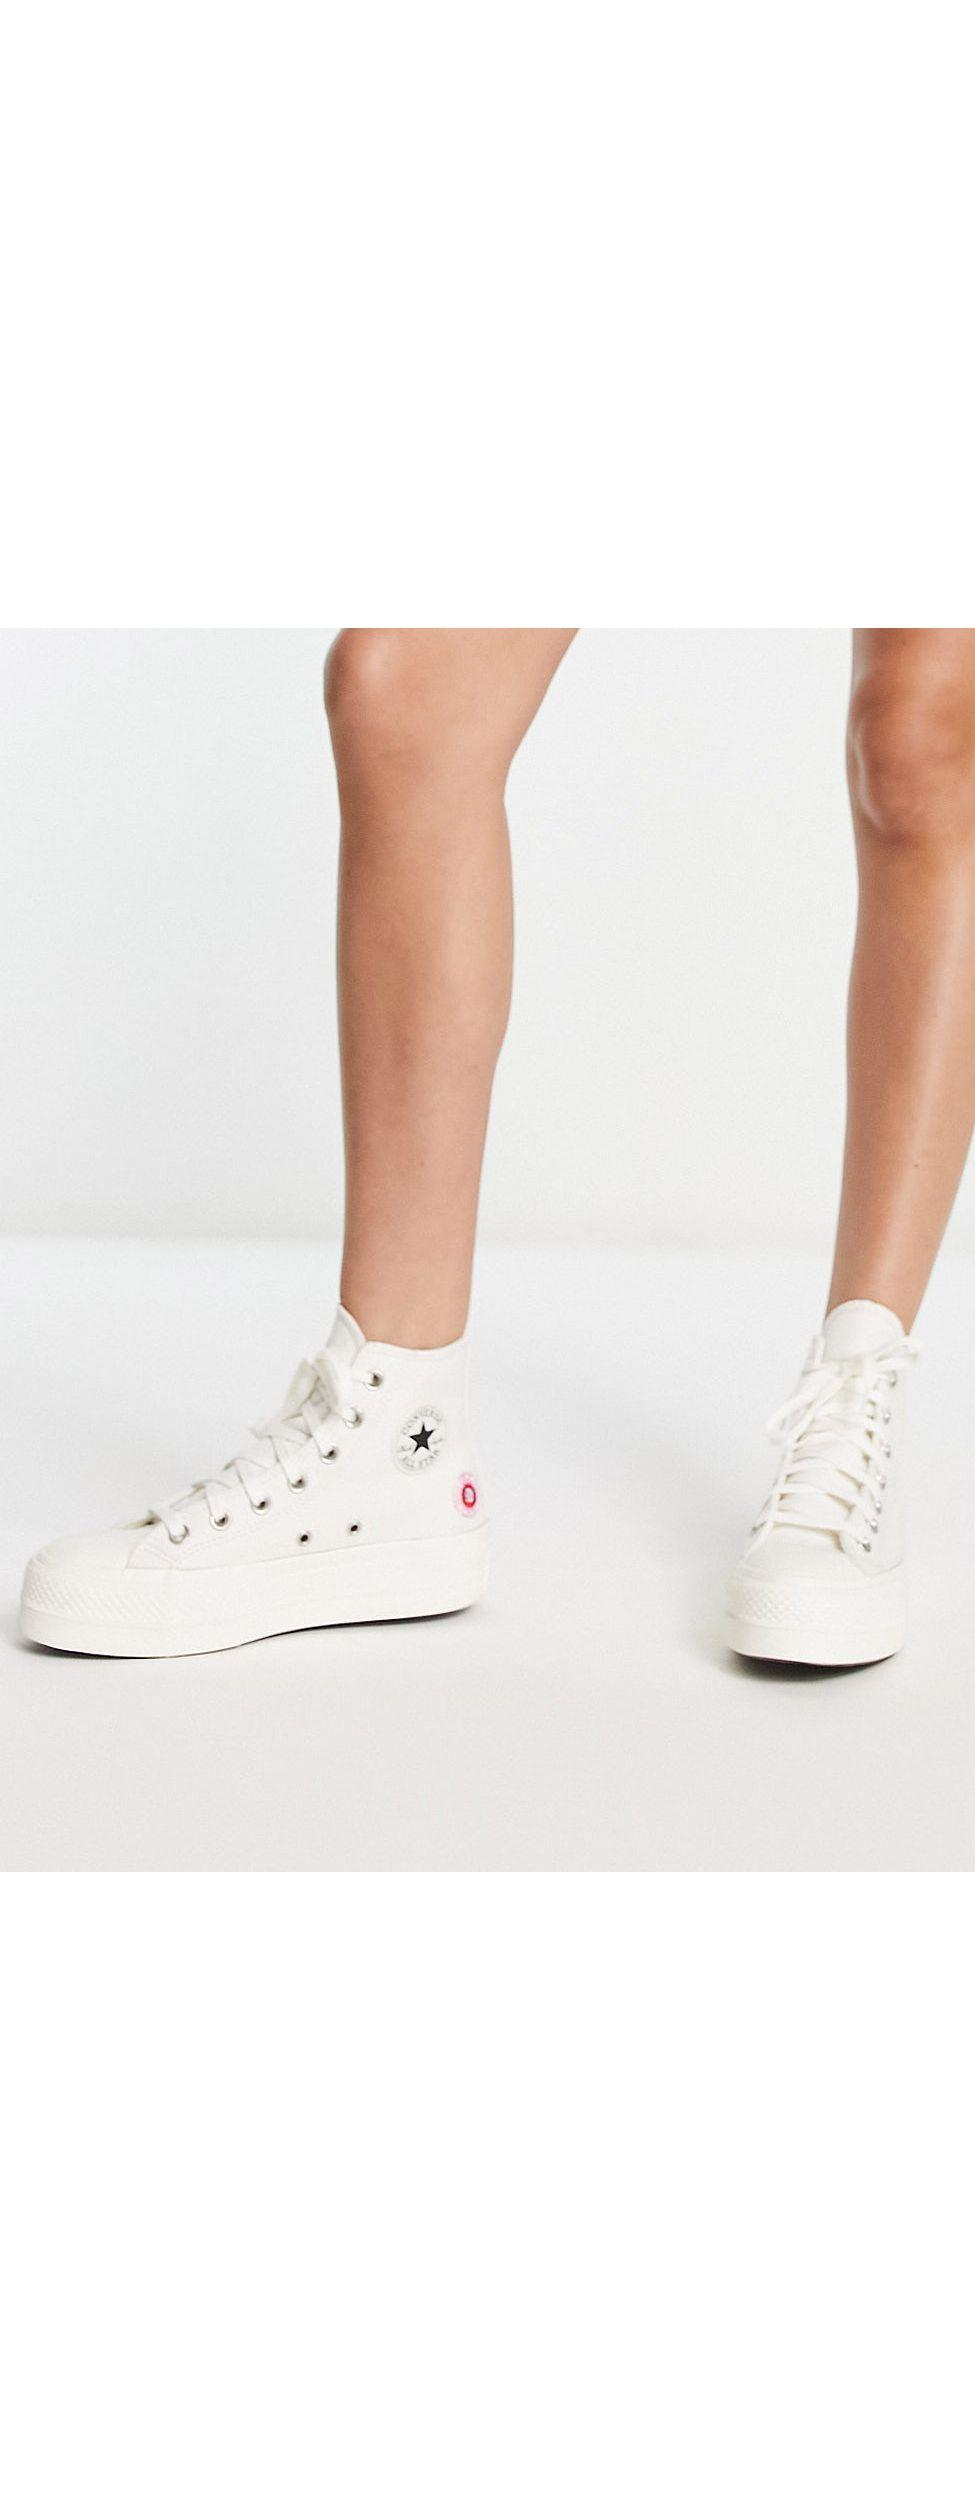 Converse Chuck Taylor Lift Hi Floral Embroidery Platform Trainers in White  | Lyst